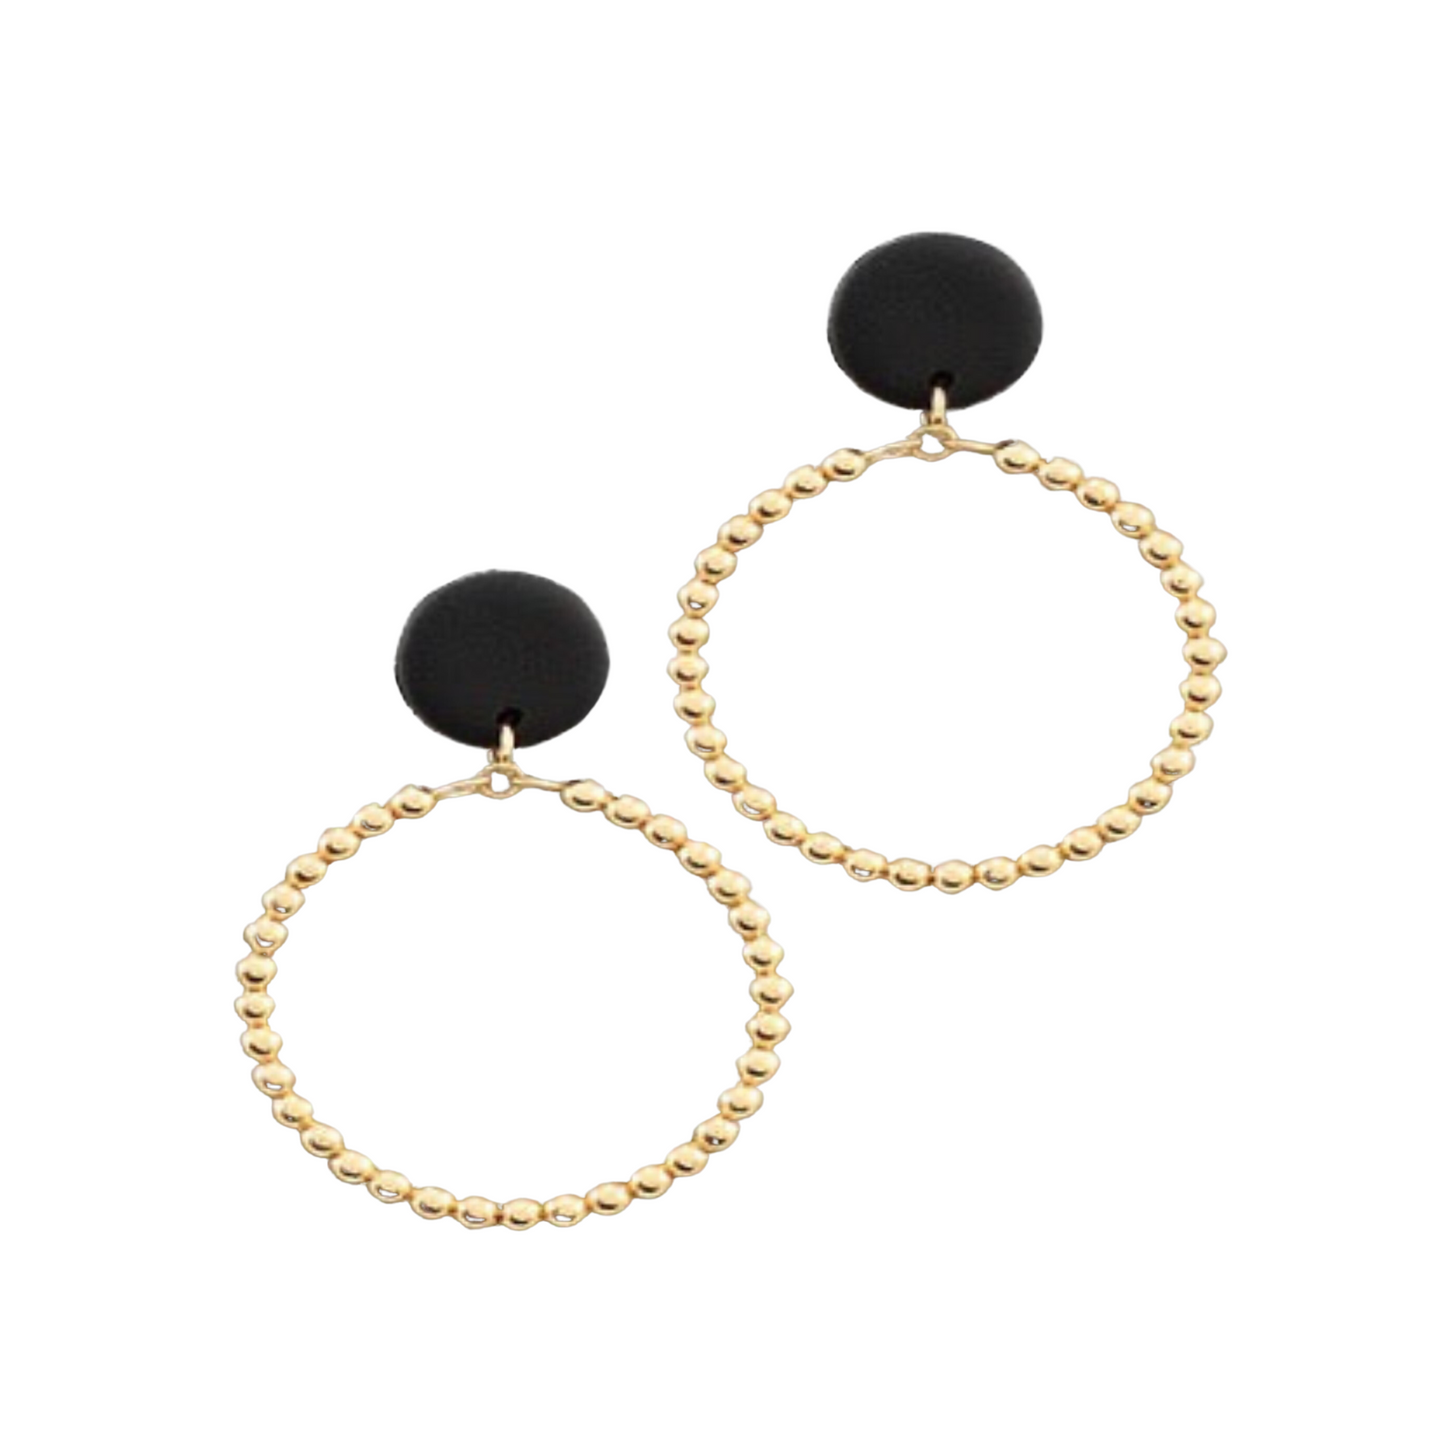 Make a bold statement with our Disk Hoop Earrings. Featuring a gold-colored hoop with three different colors — lavender, black, and white — these earrings will add the perfect pop of color to any outfit. The large, lightweight hoops provide an unforgettable look that’s sure to turn heads.